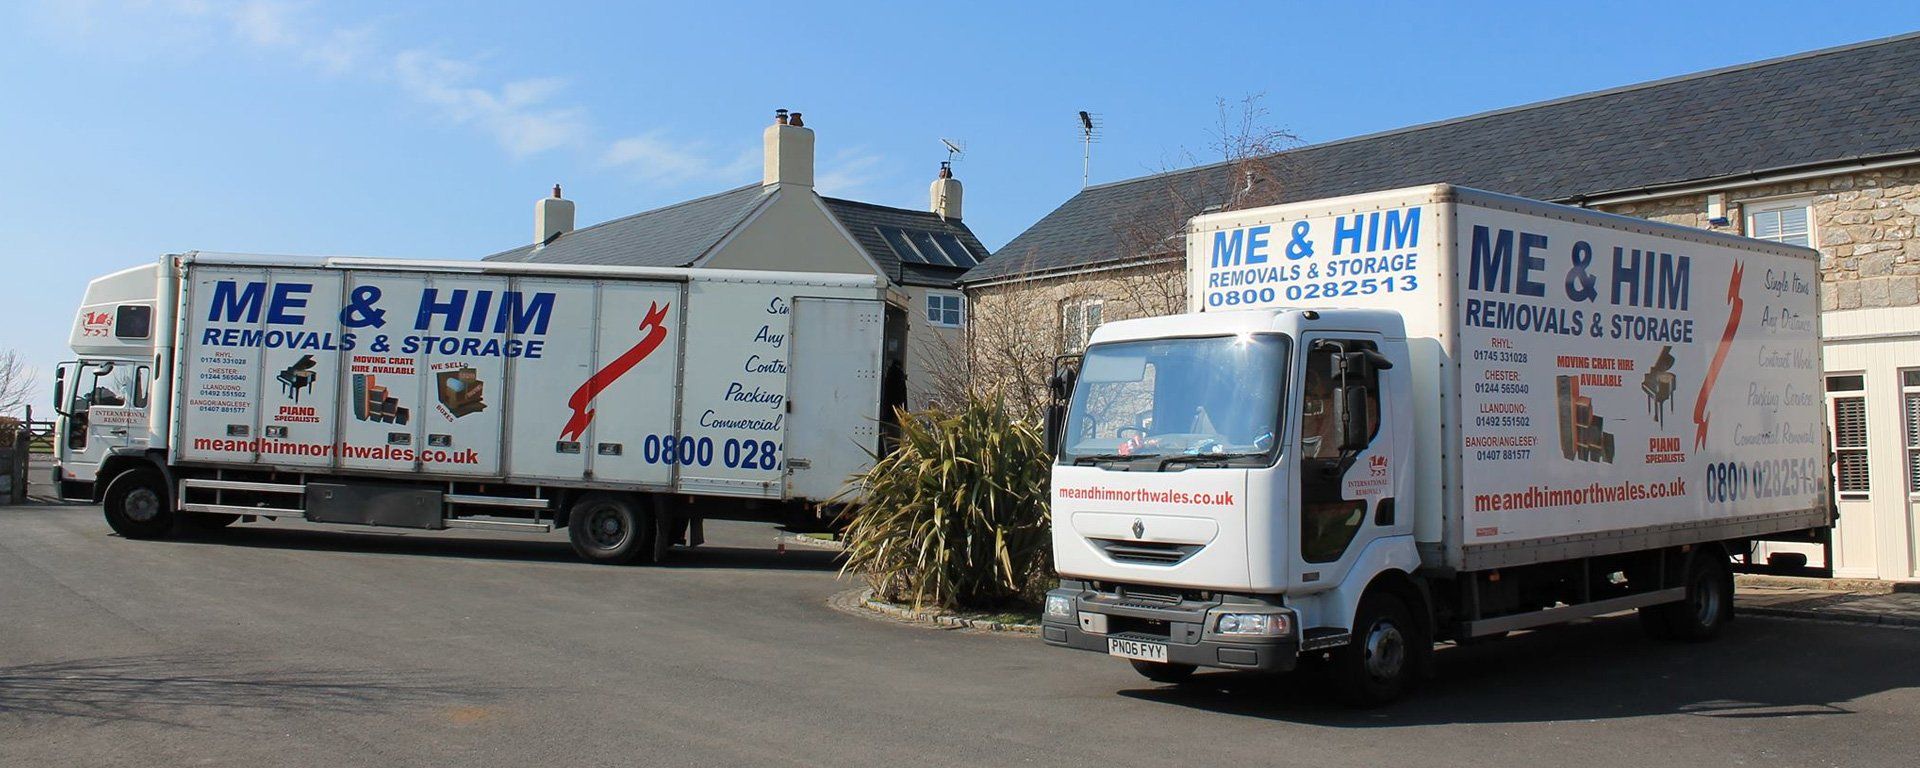 Me & Him Removals and Storage Vehicle